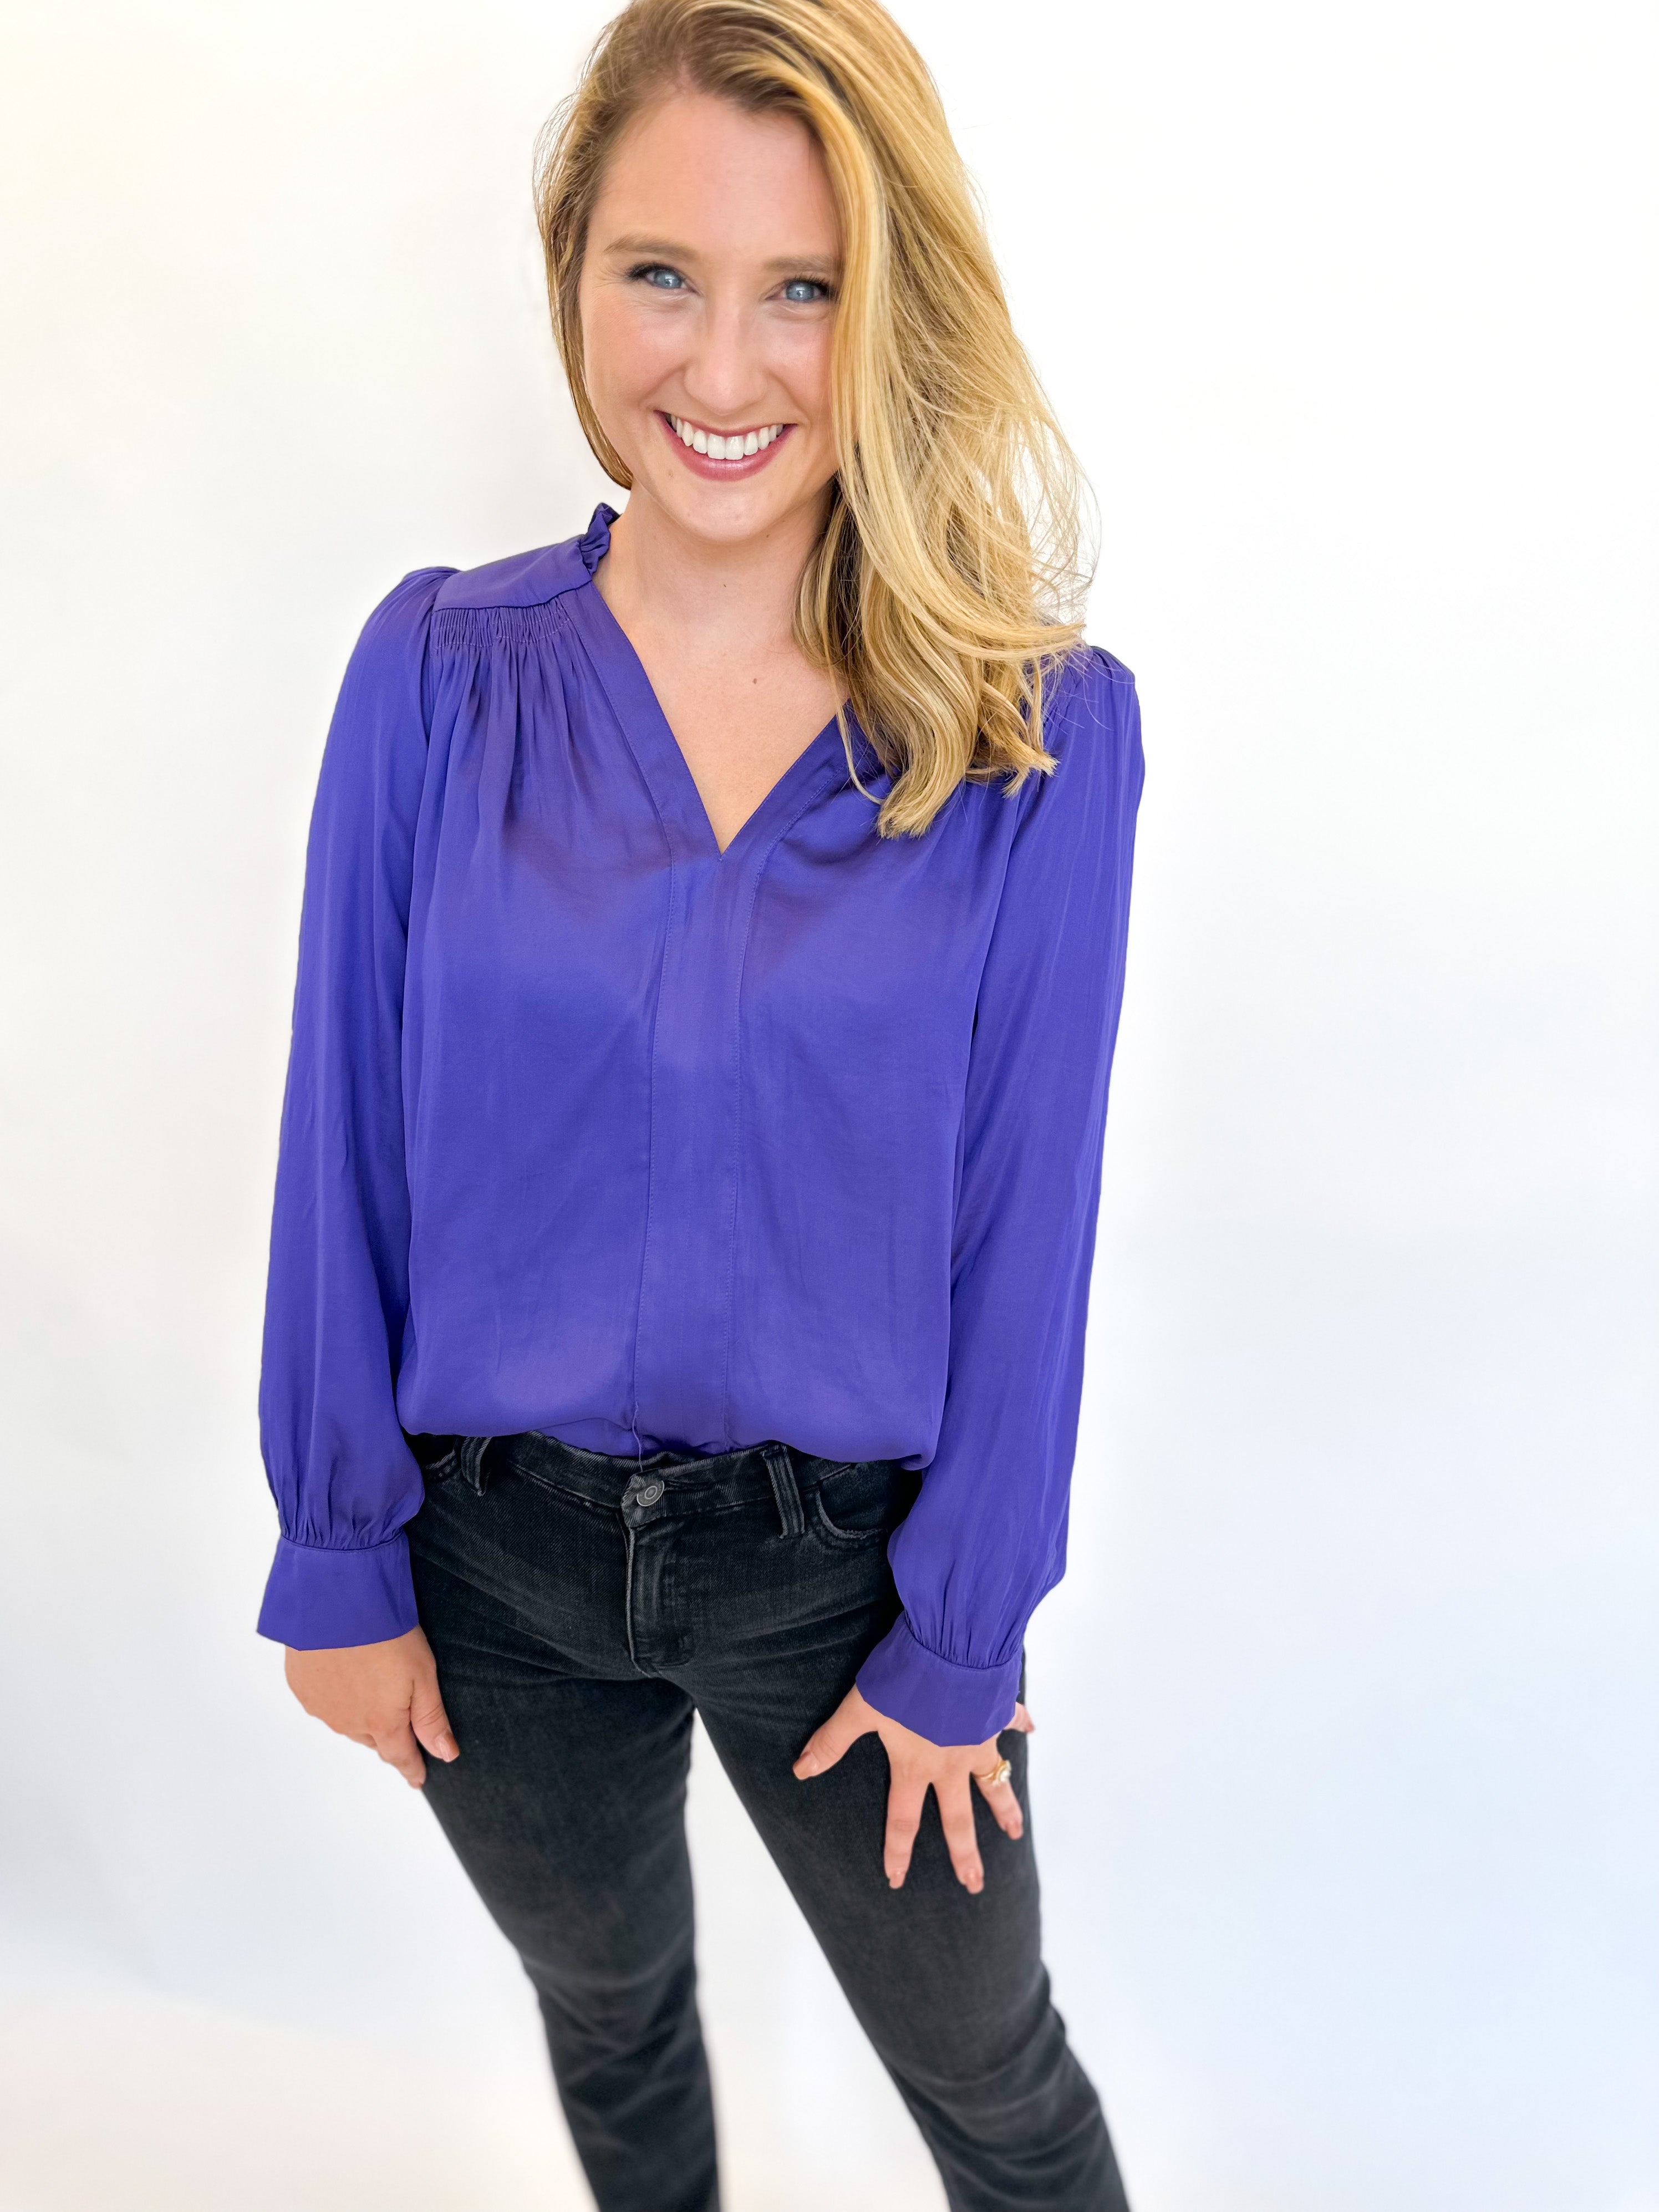 CURRENT AIR CLOTHING WOMEN 200 Fashion Blouses-200 Fashion Blouses-CURRENT AIR CLOTHING-July & June Women's Fashion Boutique Located in San Antonio, Texas